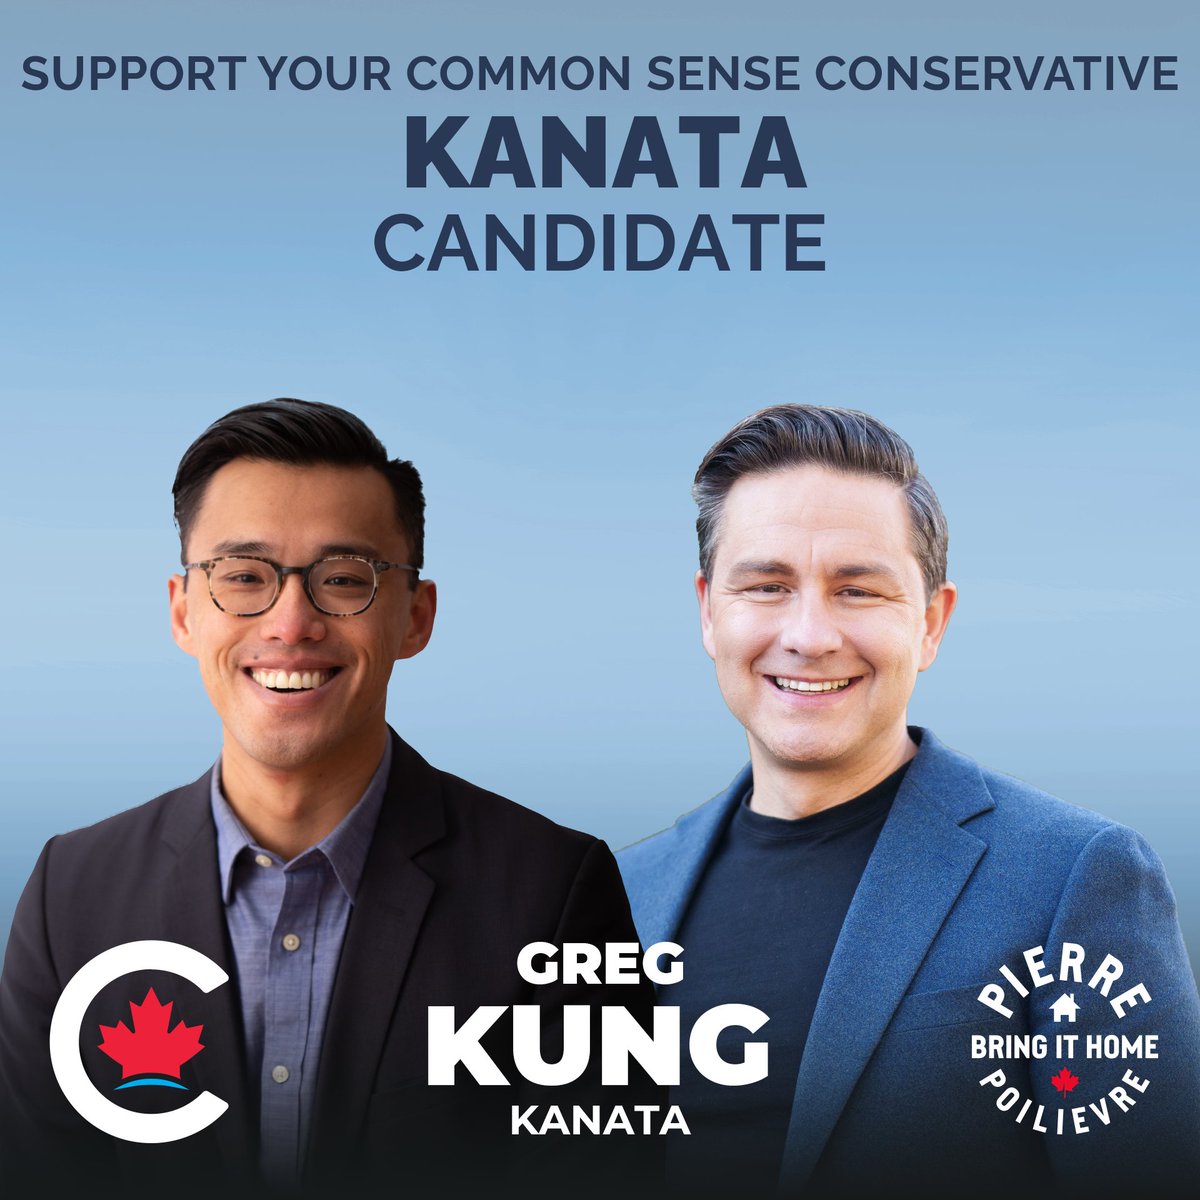 Send Trudeau a message. Support your Common Sense Conservative candidate in Kanata, Greg Kung: gregkung.ca